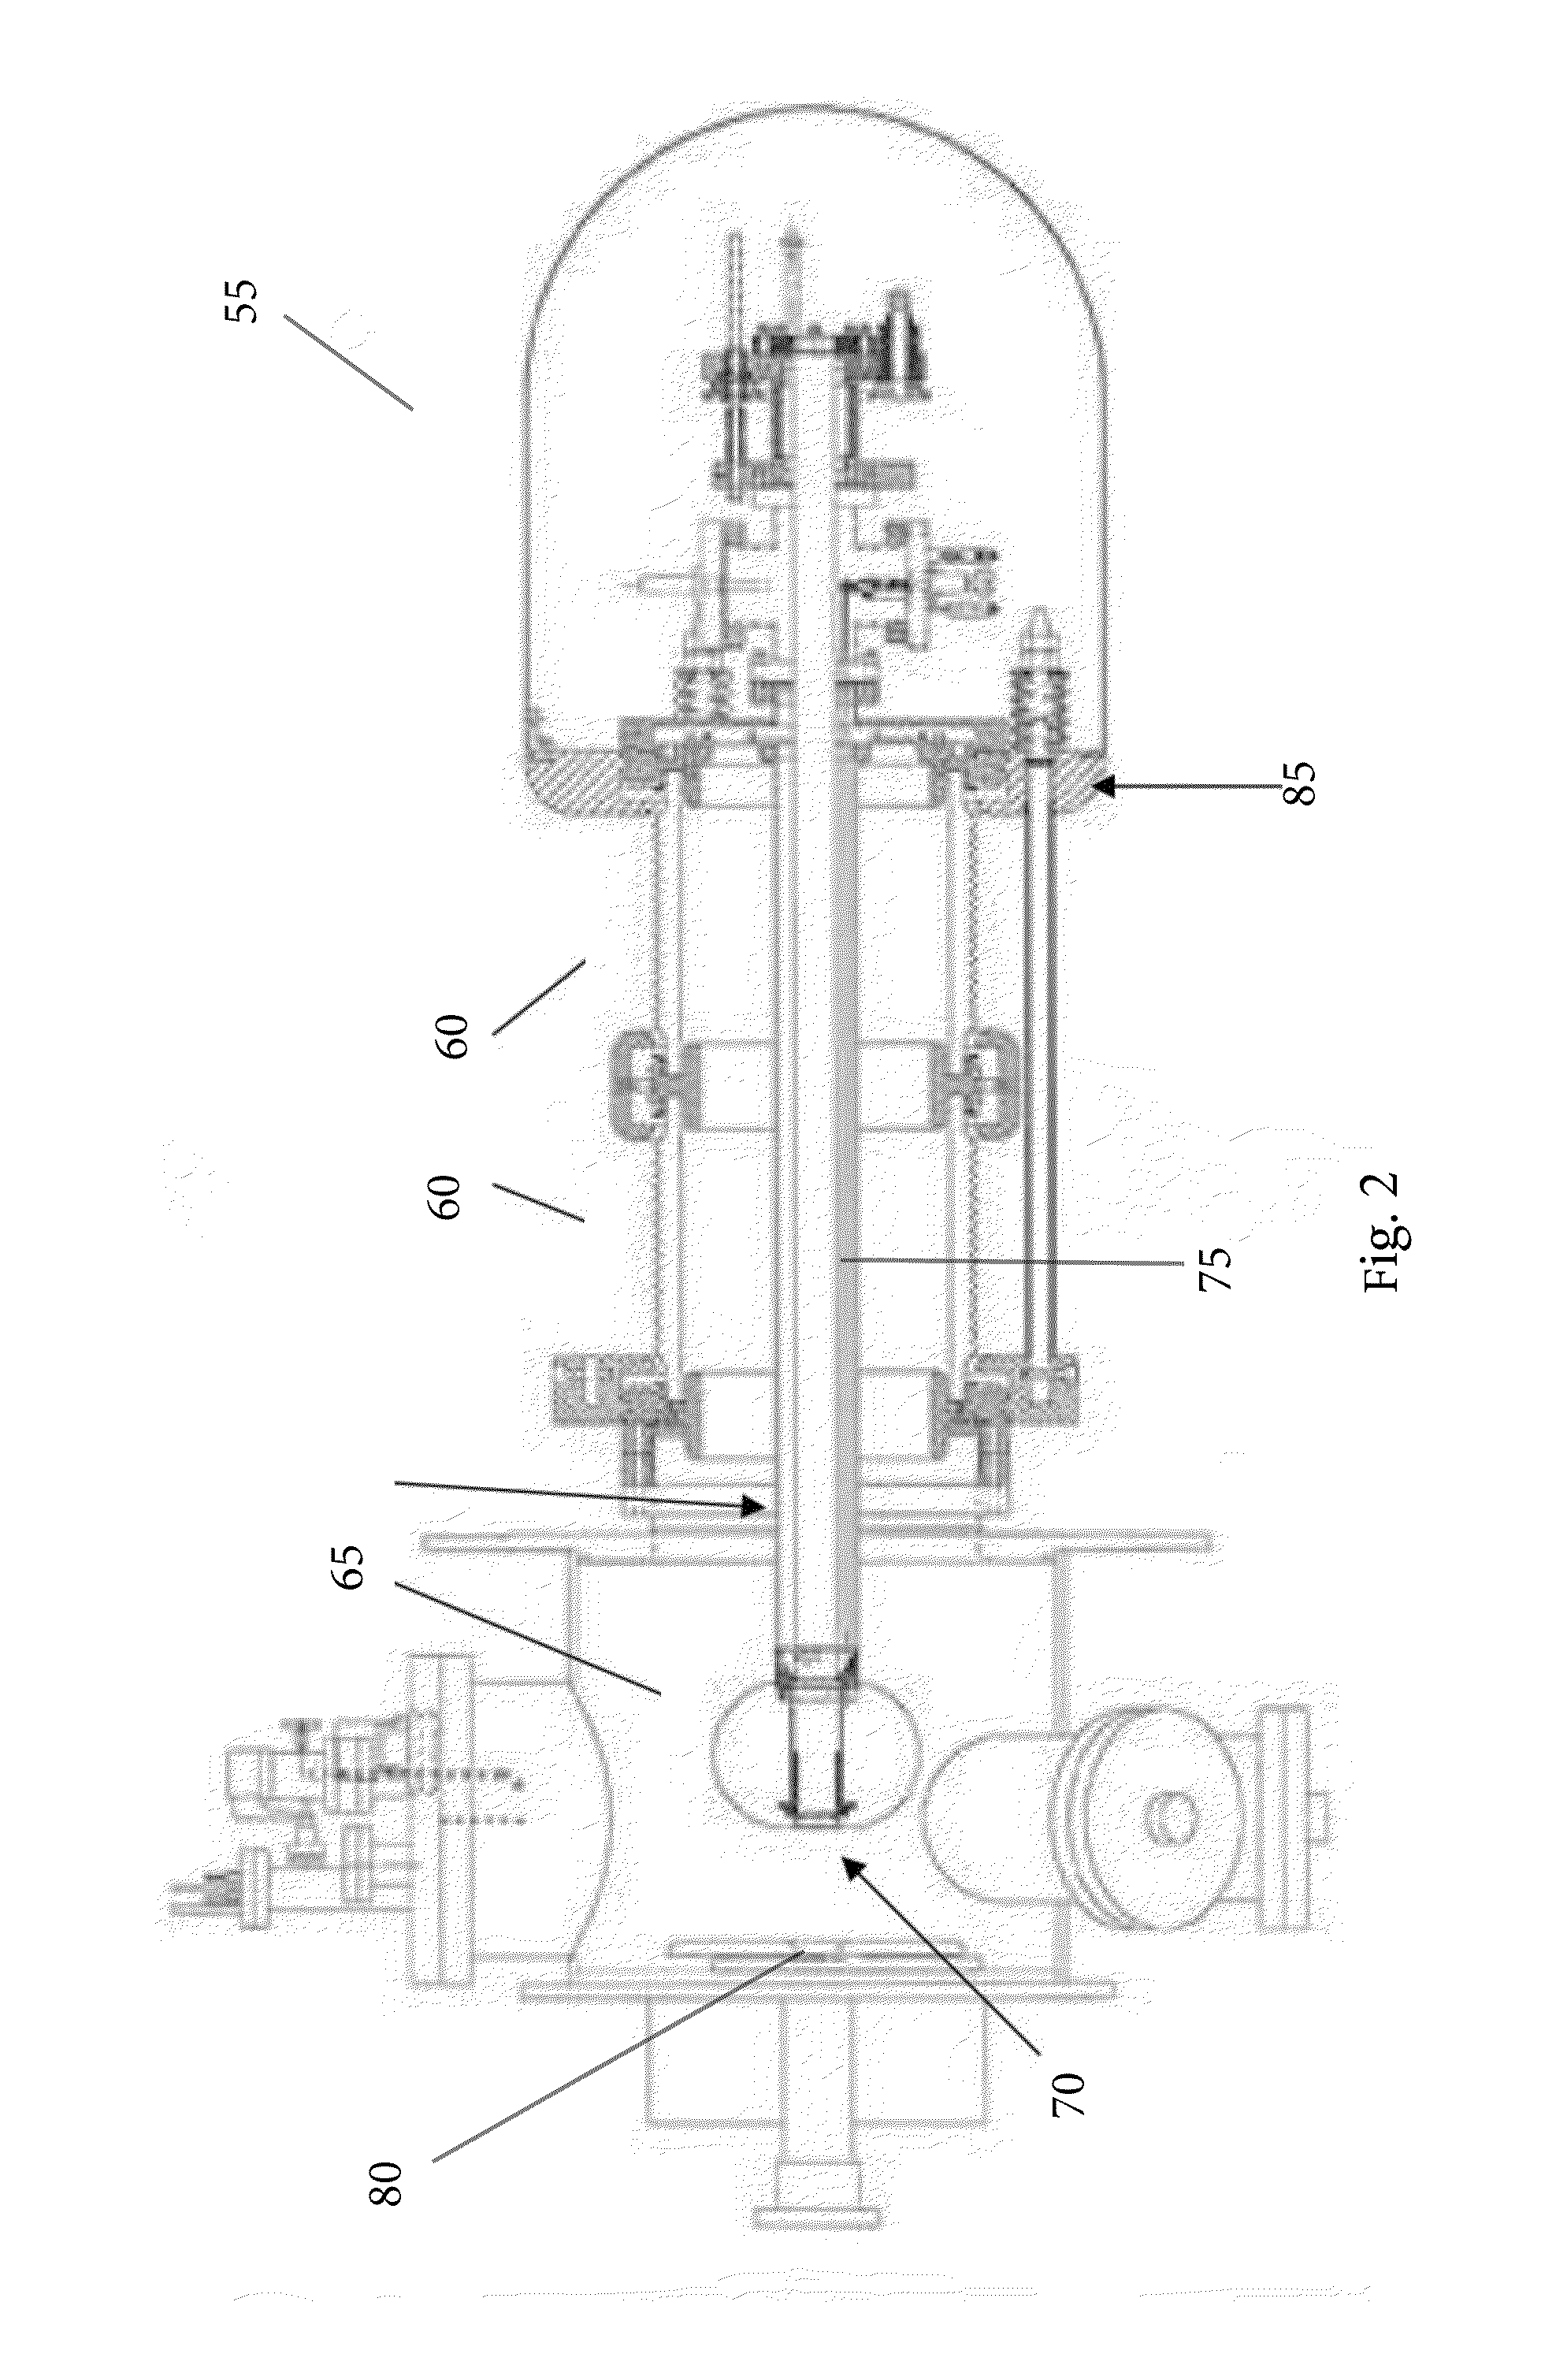 System for instrumenting and manipulating apparatuses in high voltage